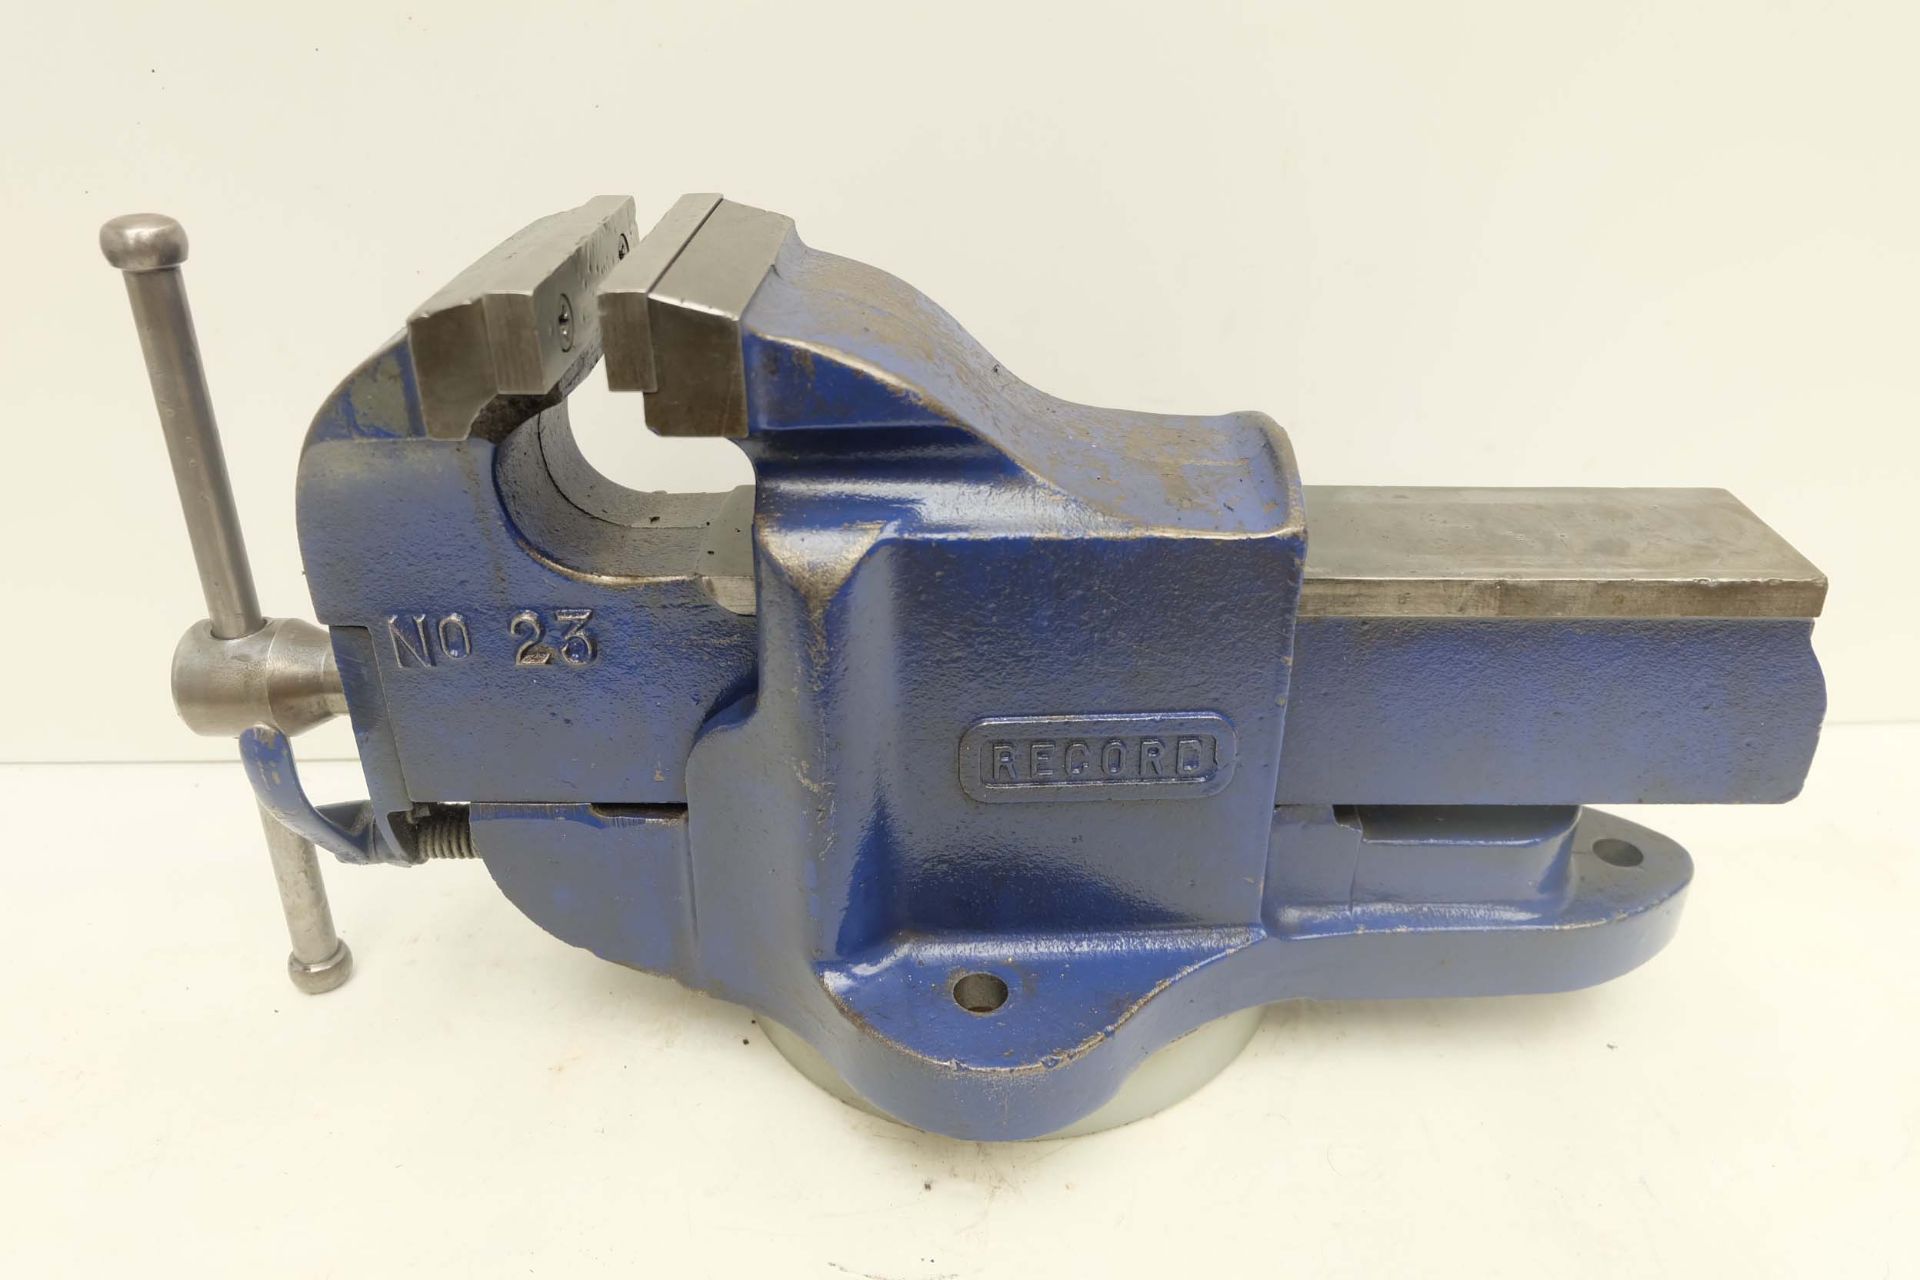 Record No.23 Bench Vice With Quick Release. Width of Jaws 4 1/4". Max Opening 6 1/4".